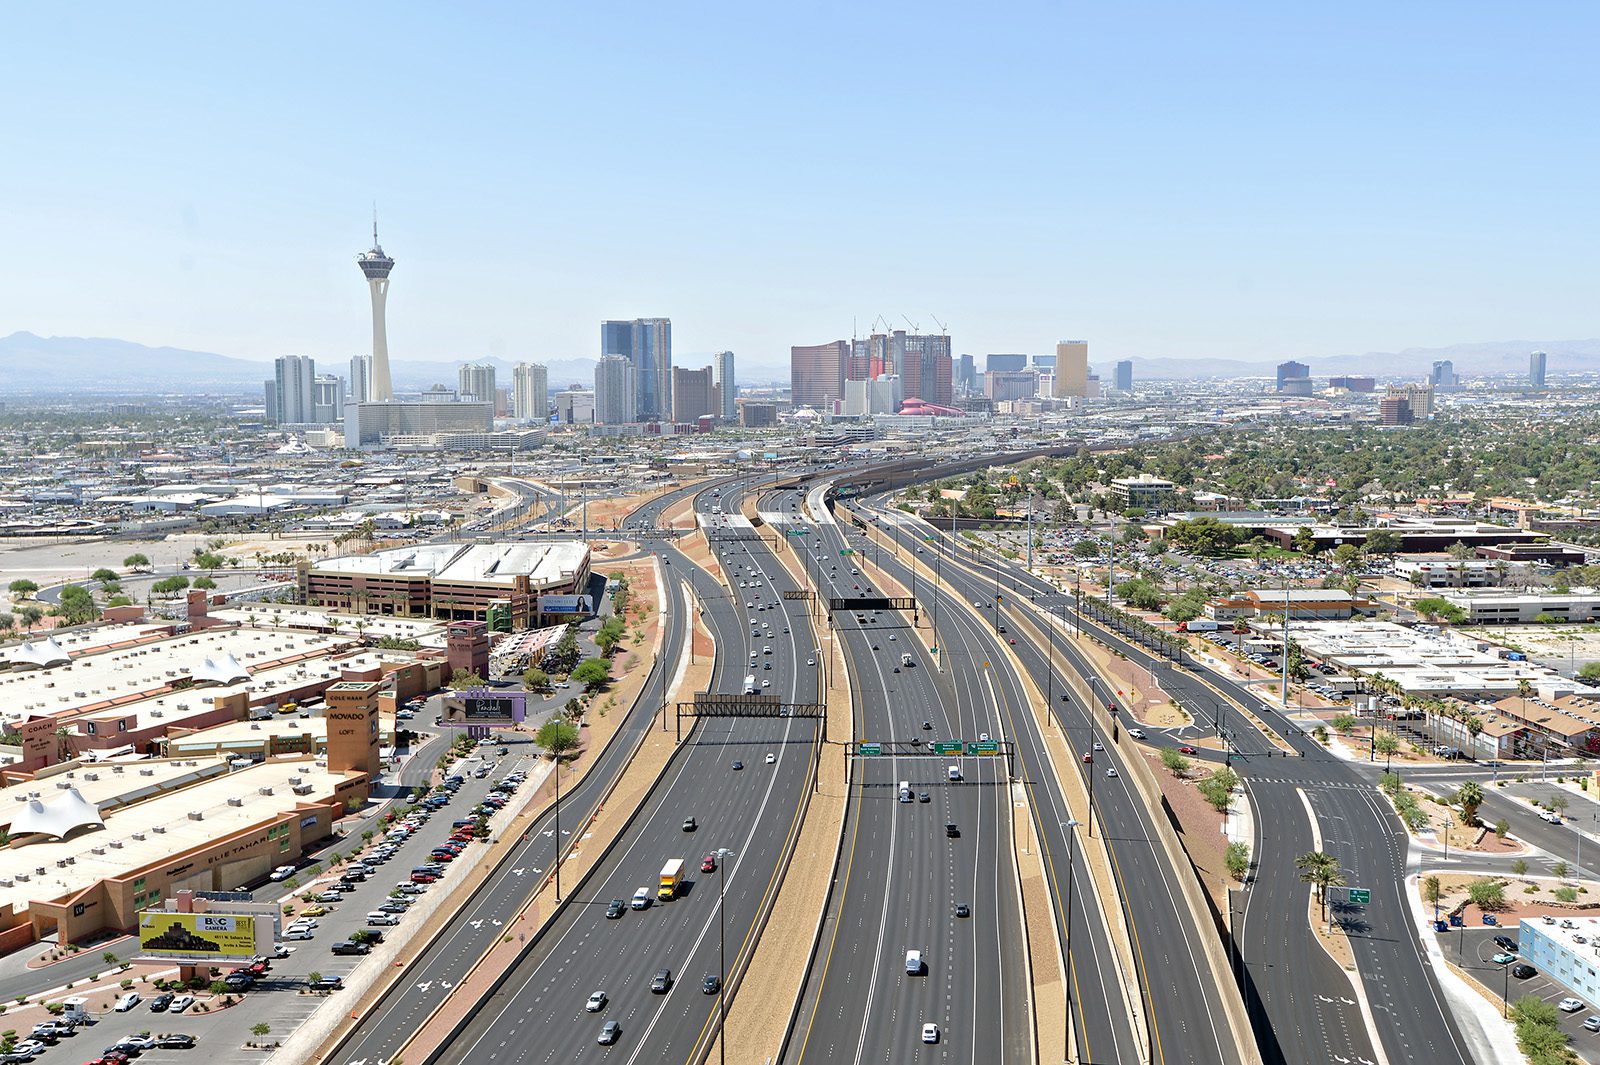 An Ariel view of the highways for Las Vegas